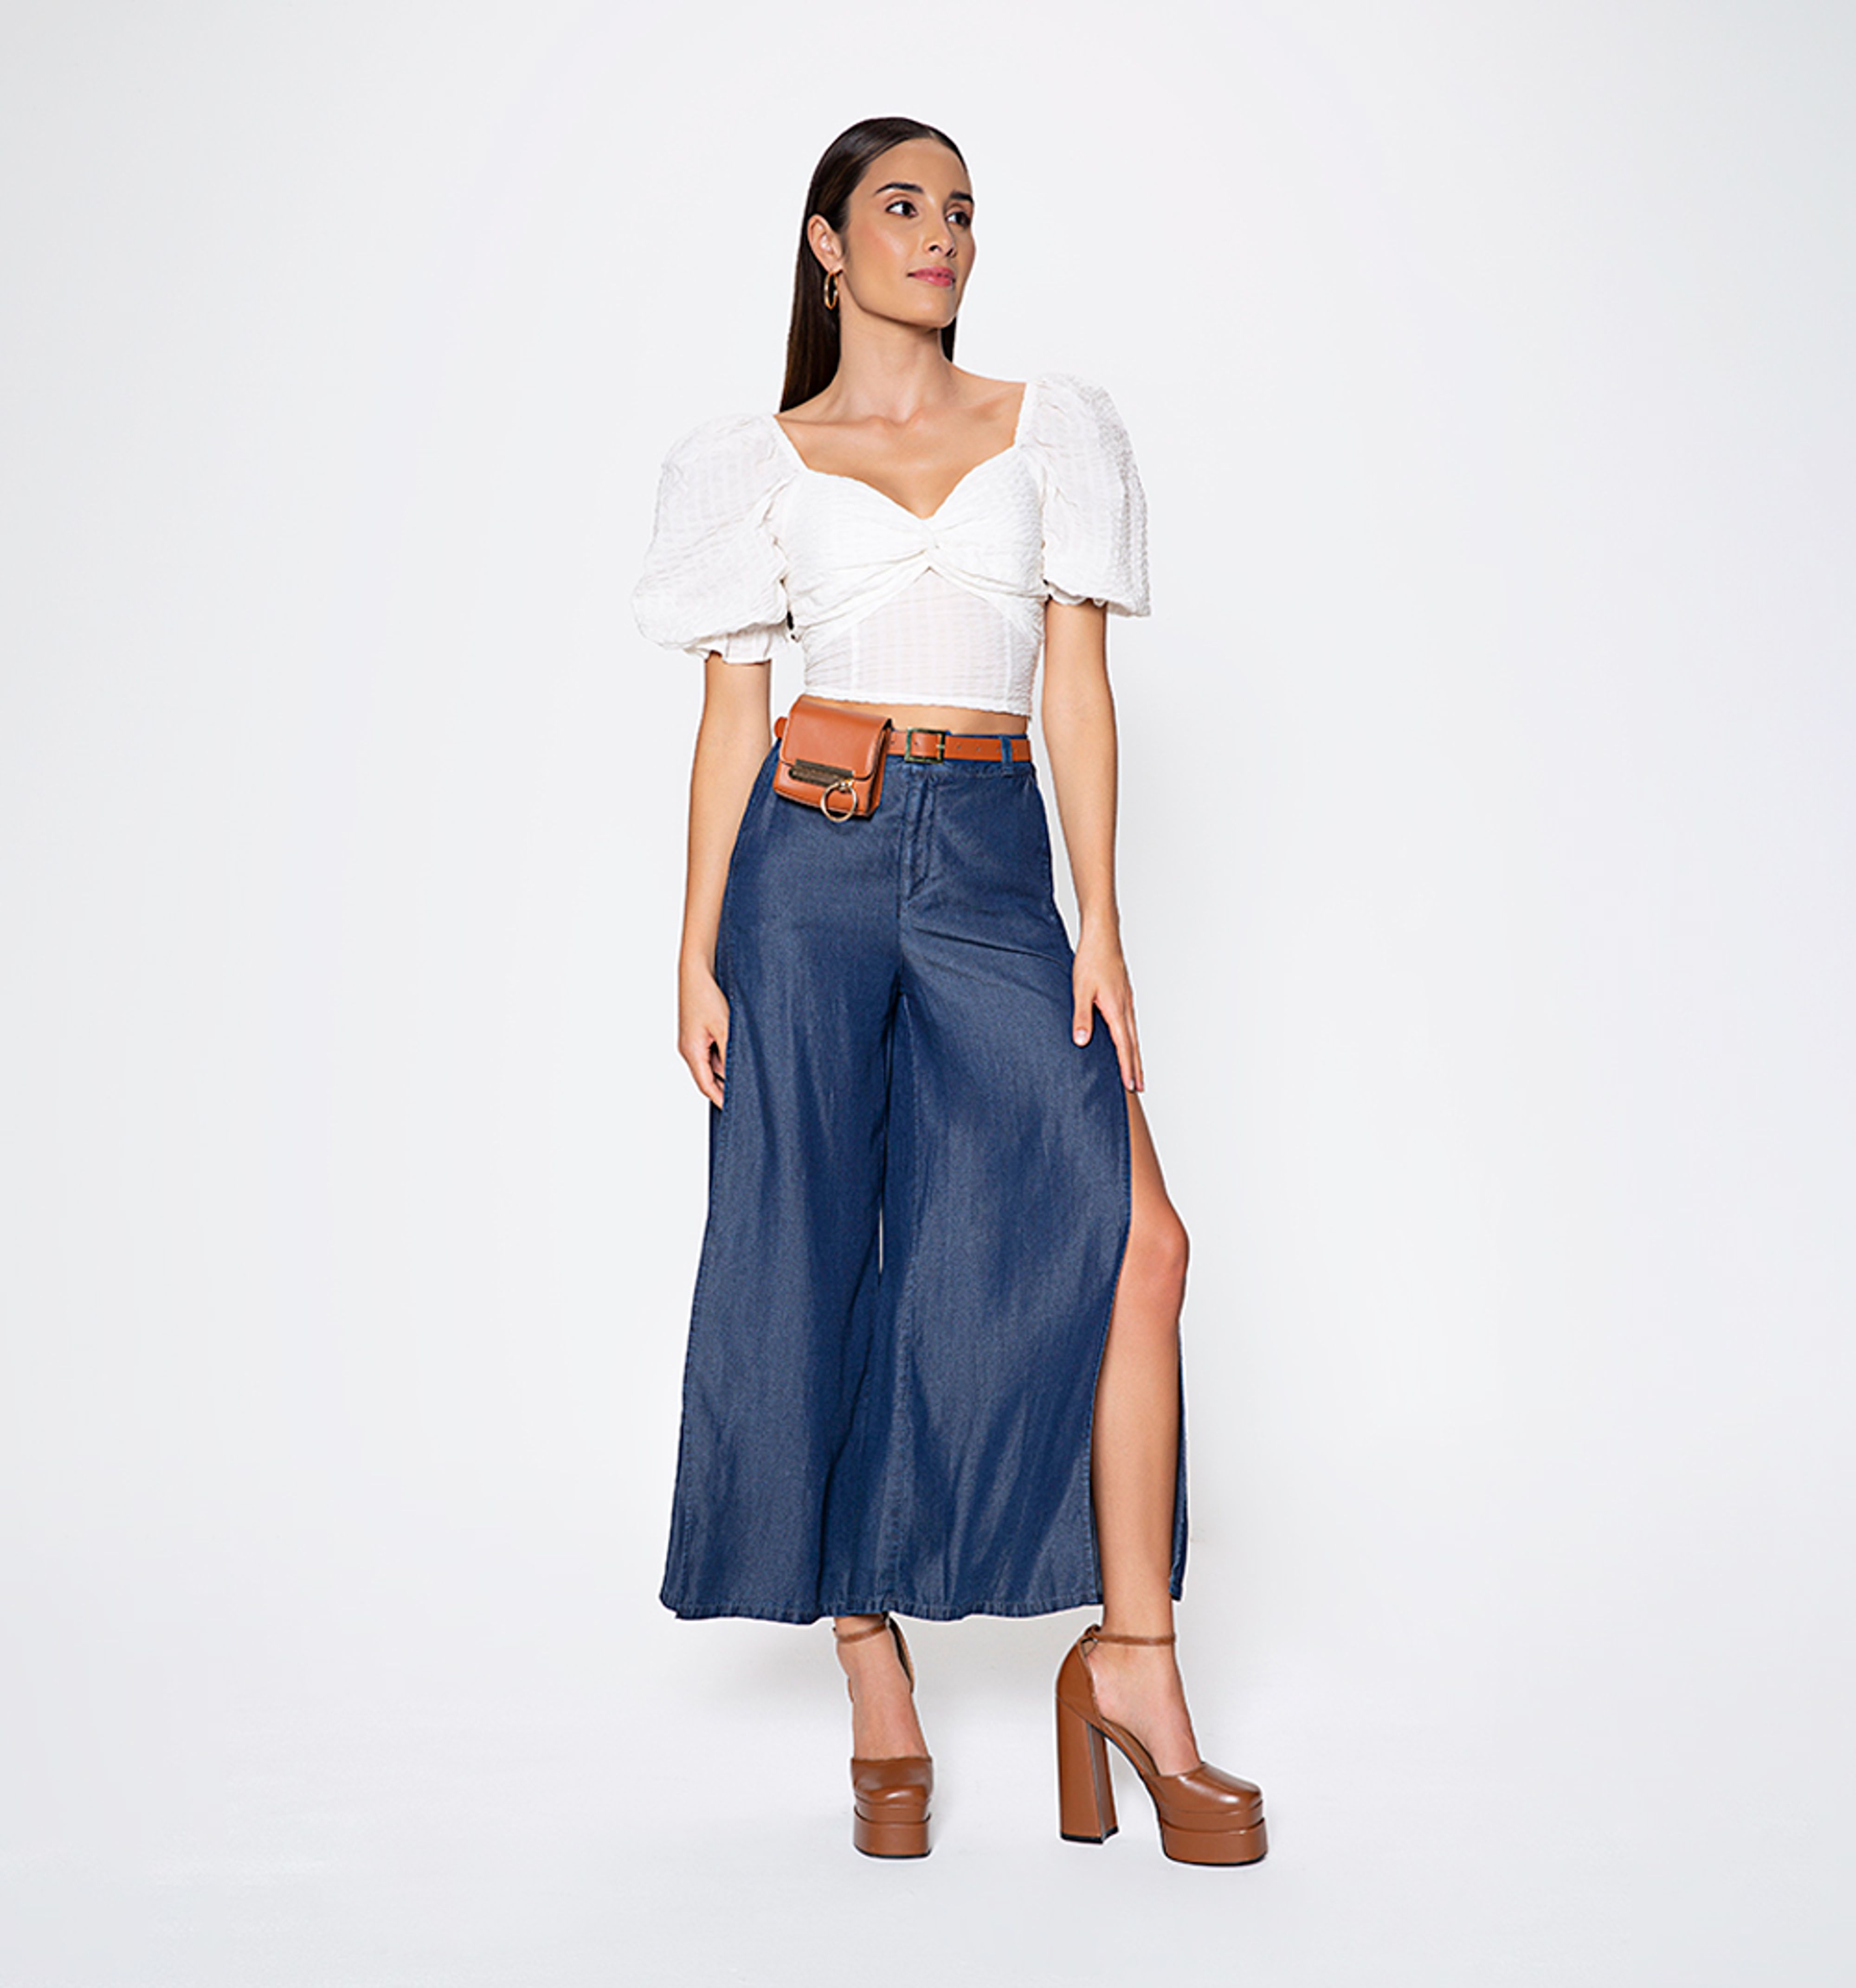 Cropped-AZUL-S1310032-1